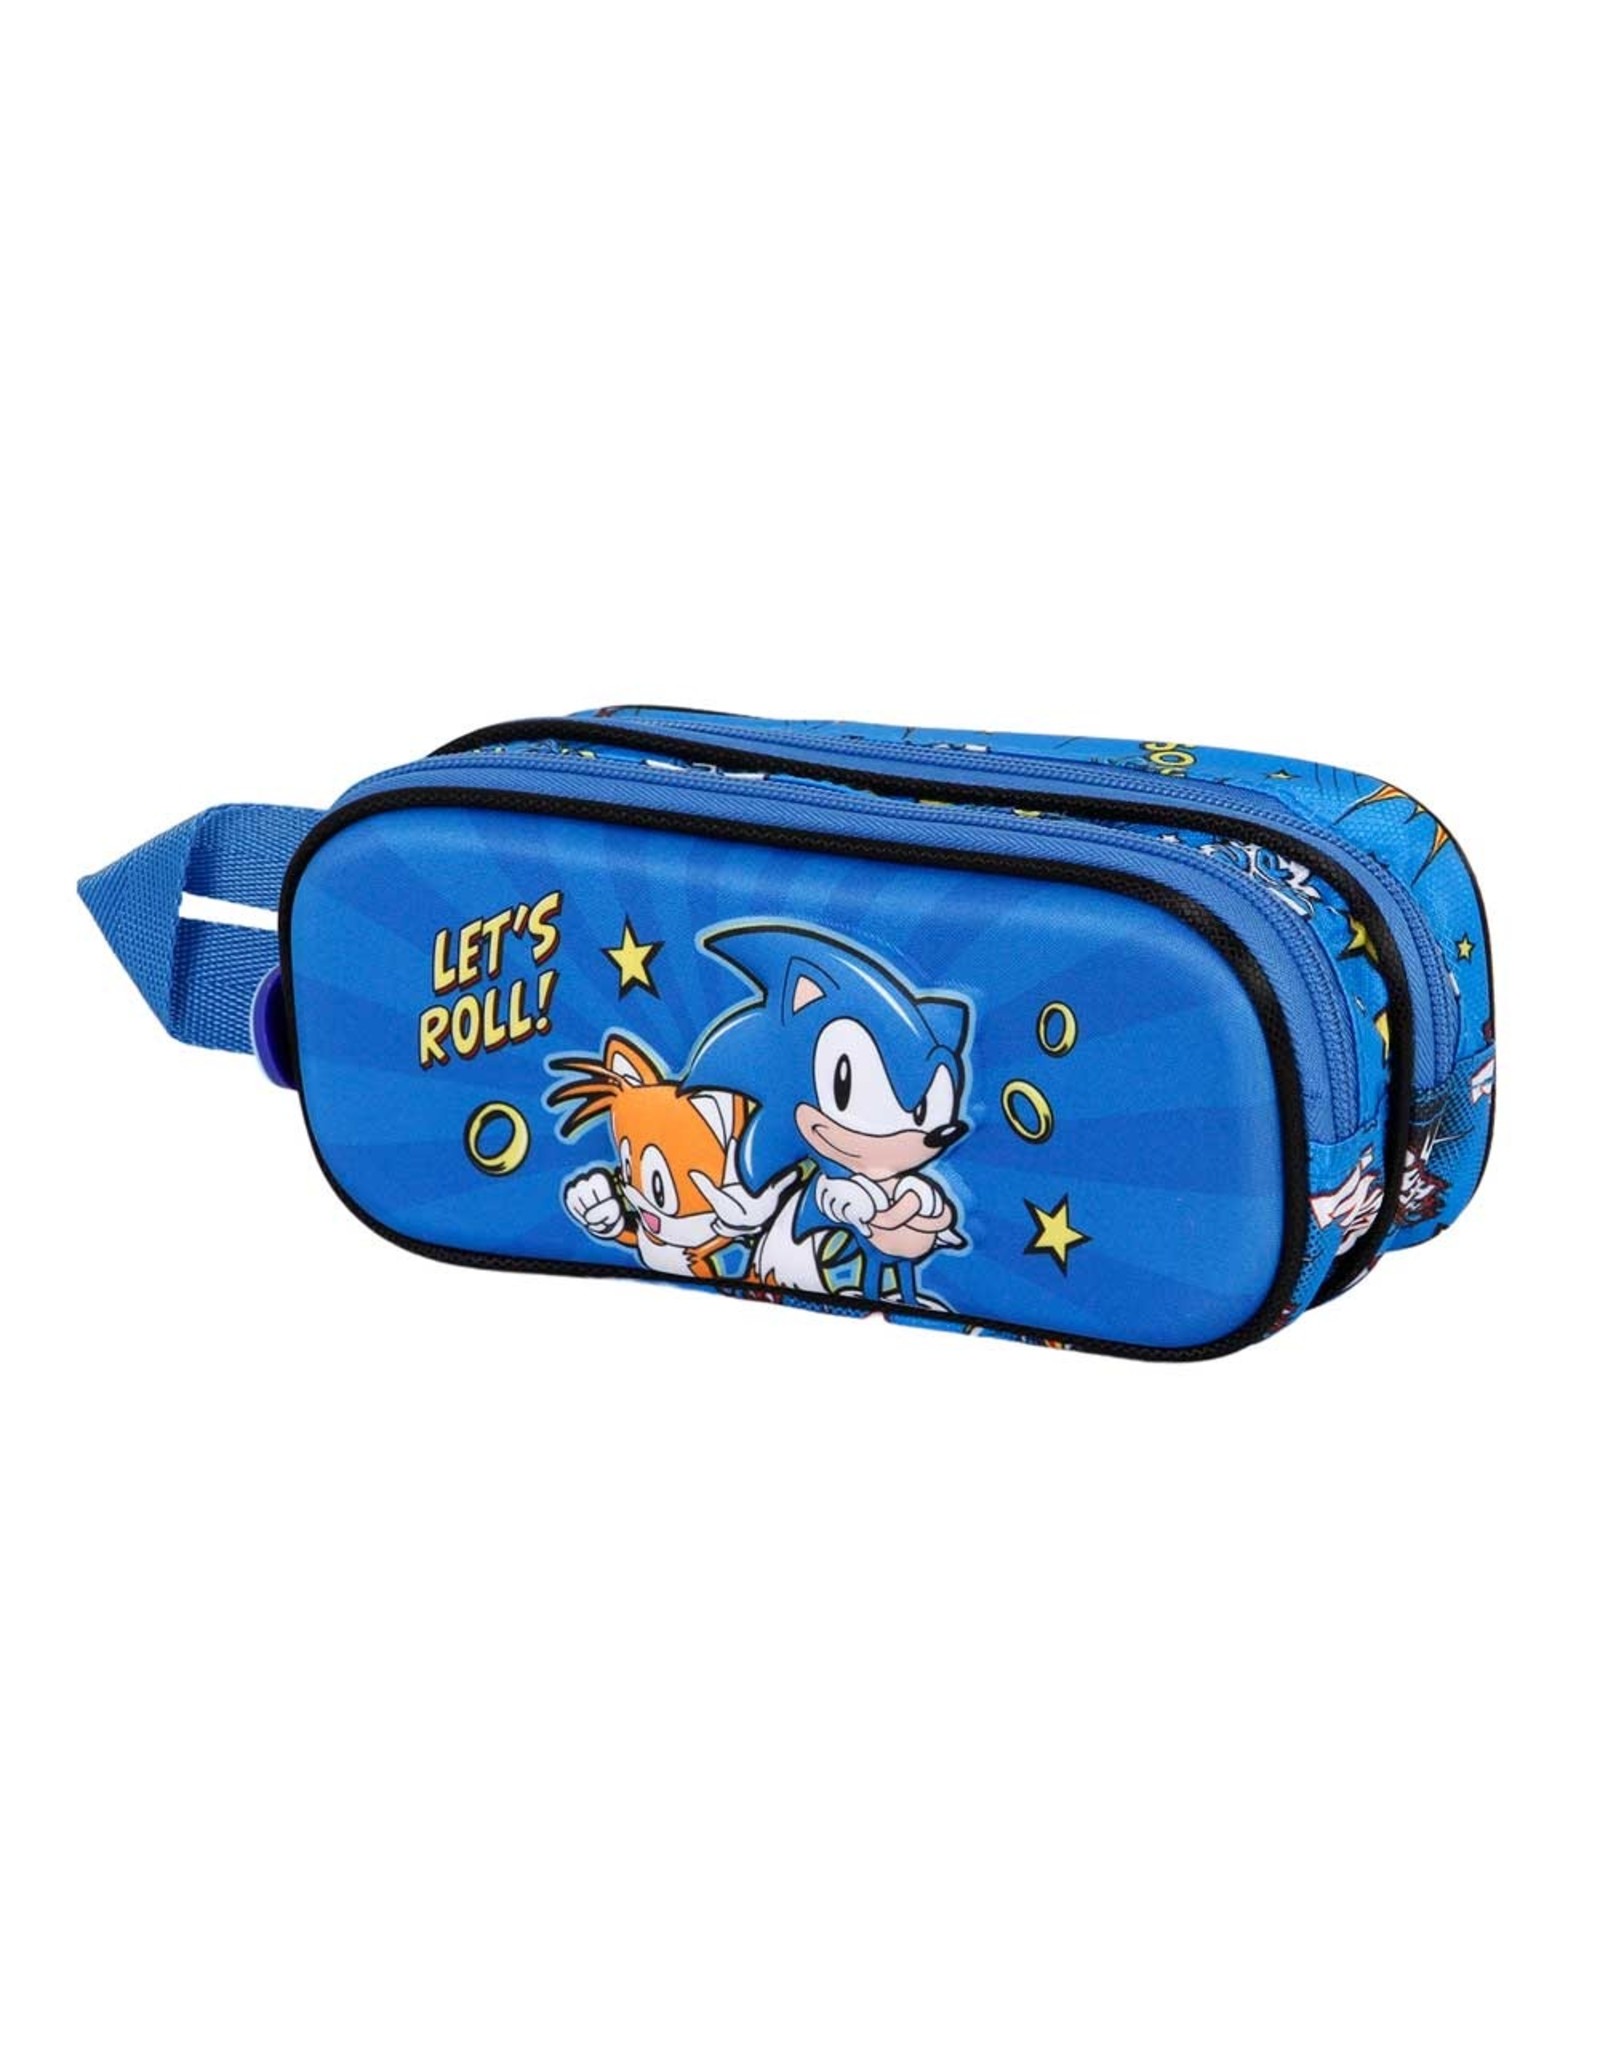 Sonic Sonic the Hedgehog 3D Etui - Let's Roll